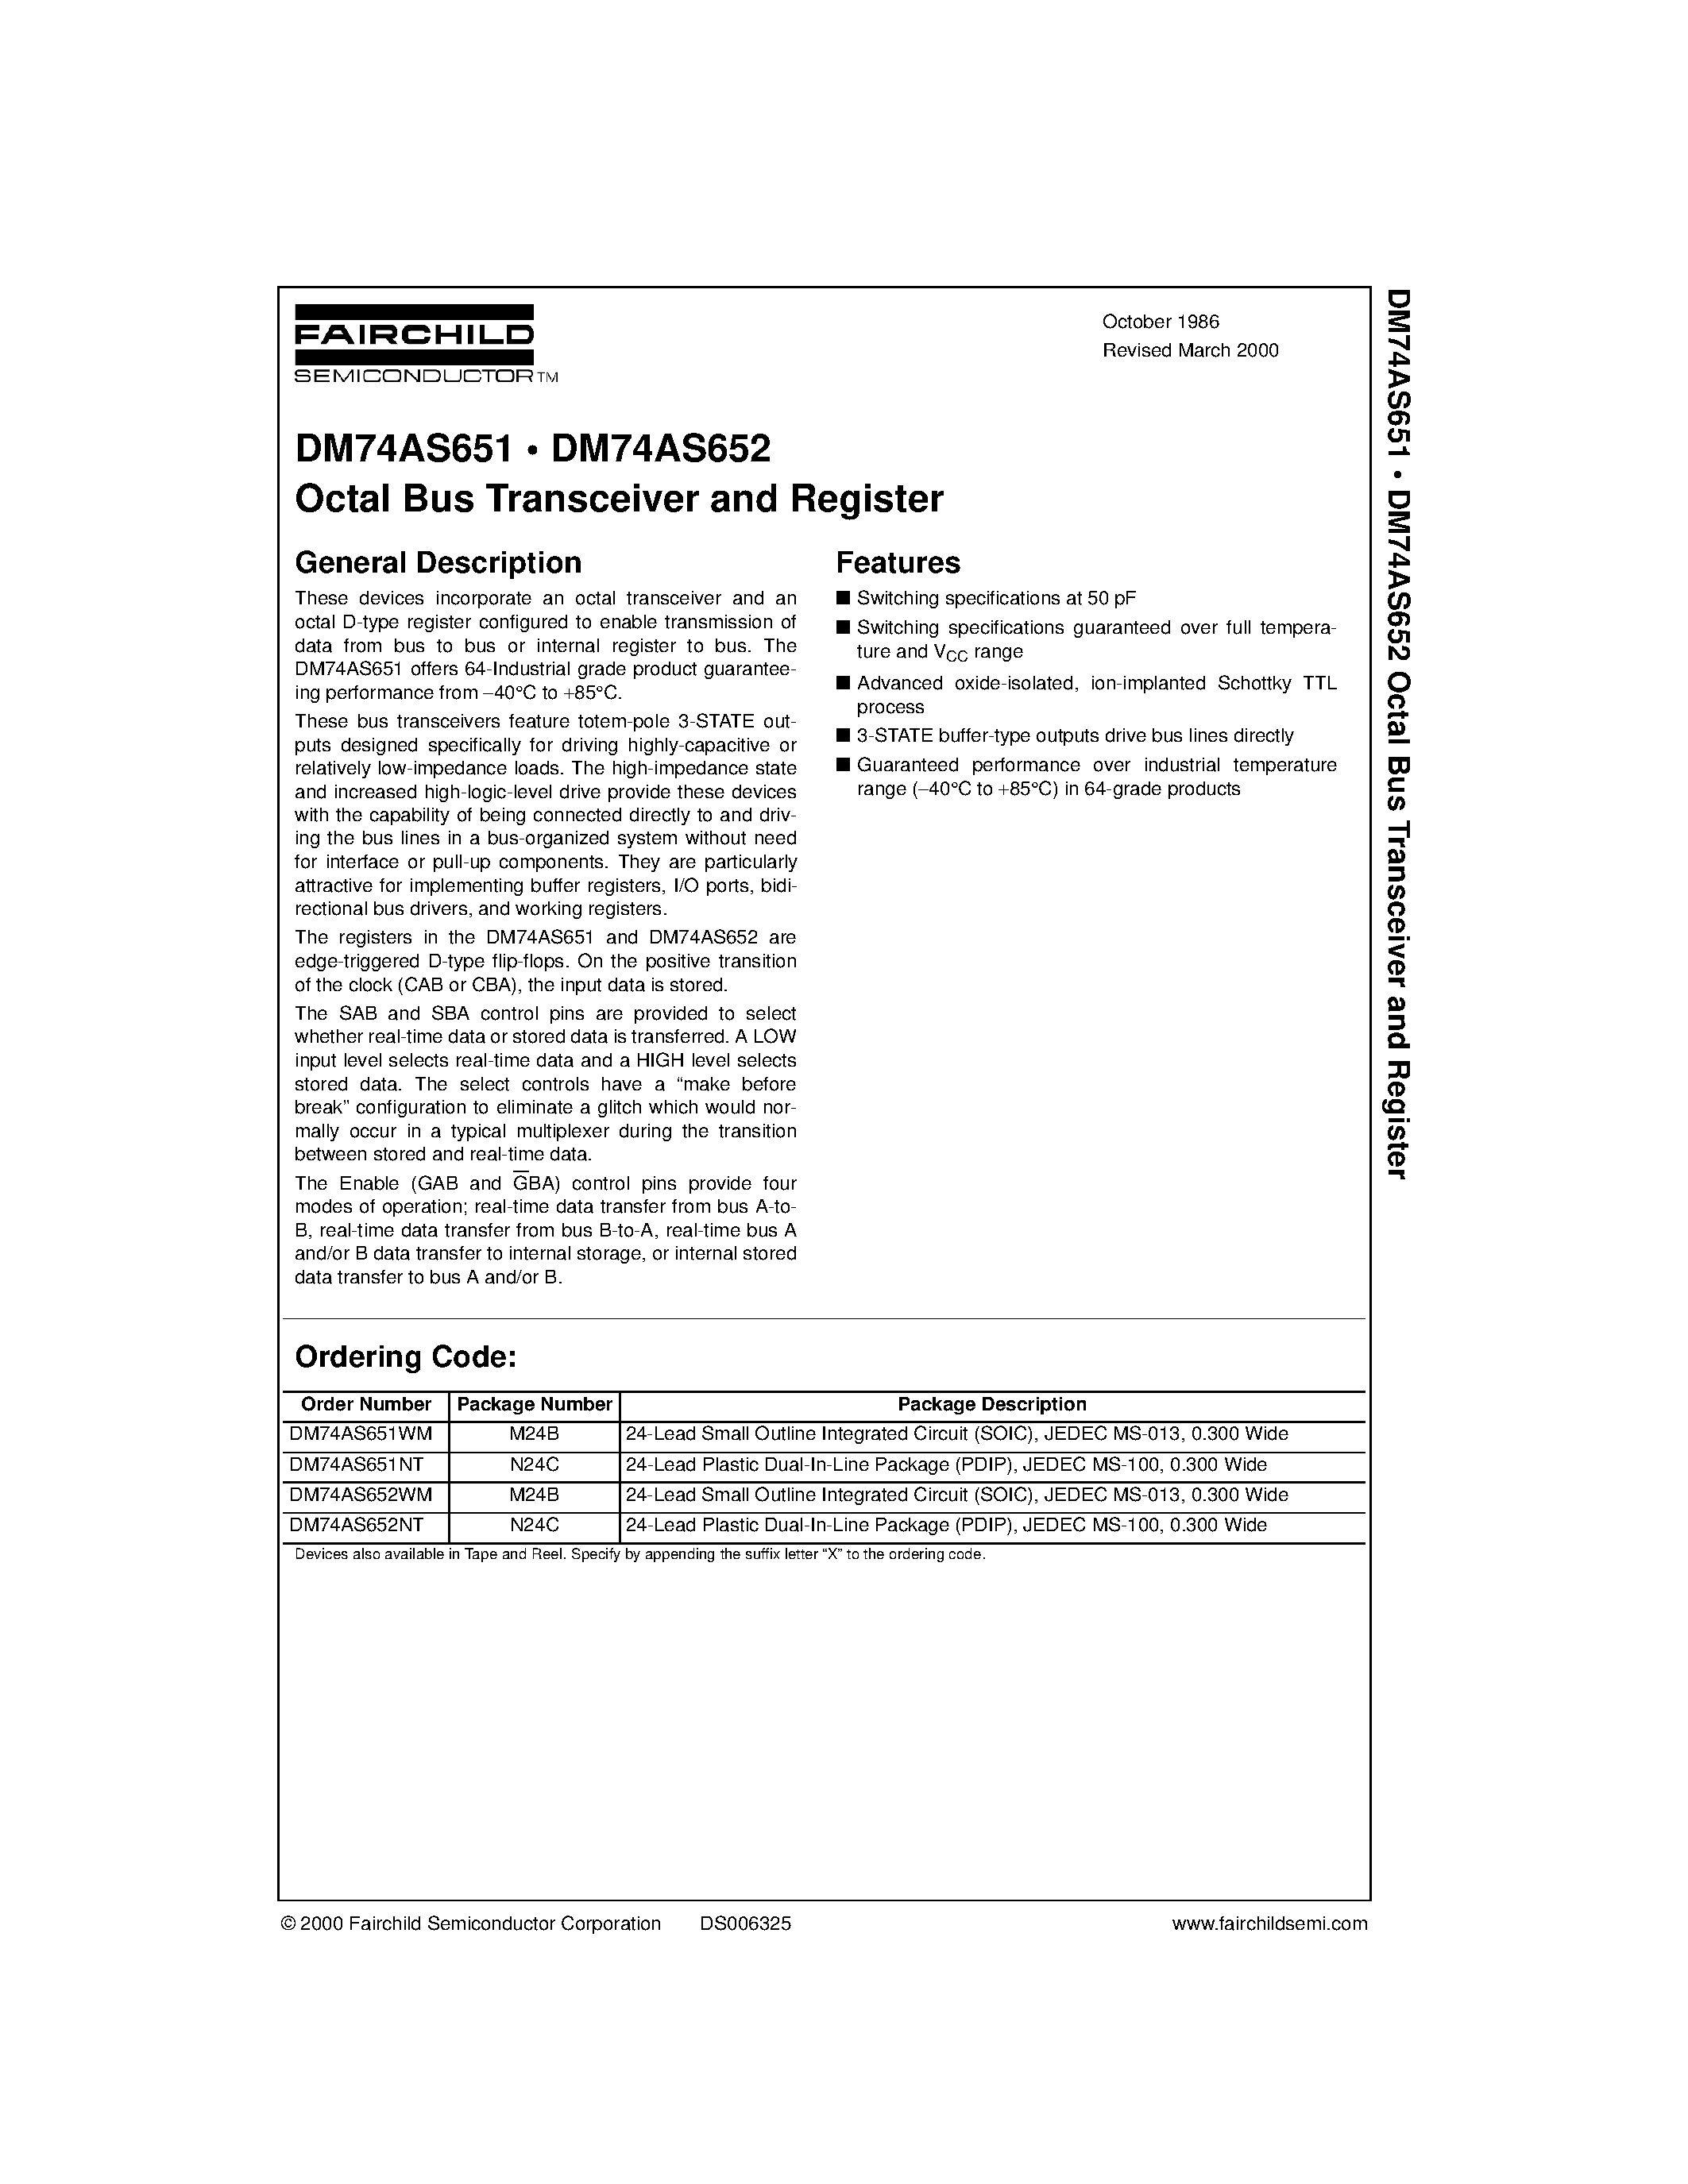 Datasheet DM74AS651WM - Octal Bus Transceiver and Register page 1